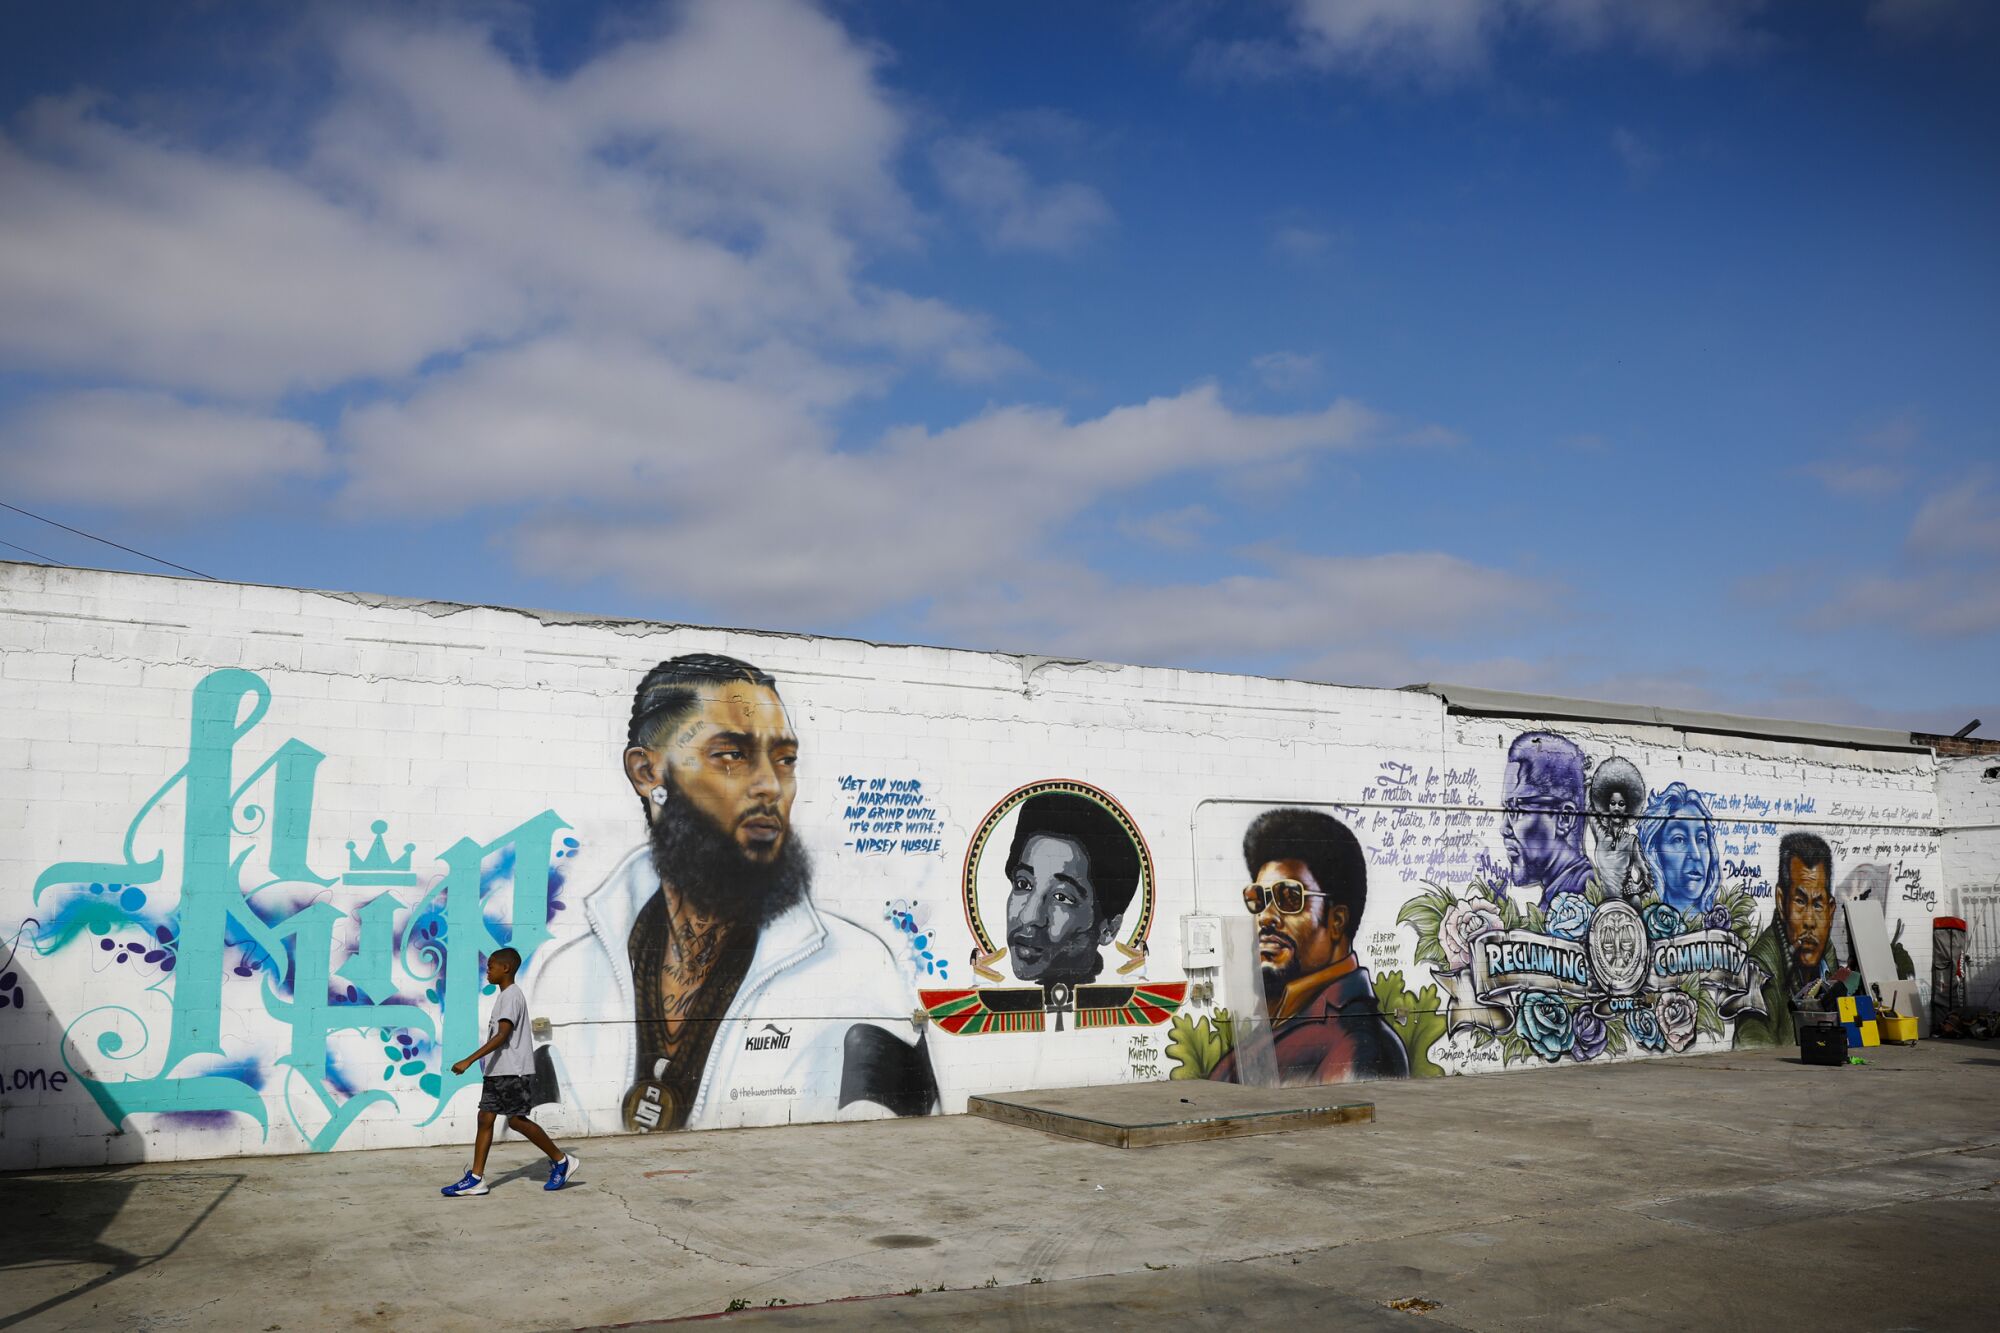 A young boy walks by "mural alley" near 63rd and Imperial Avenue in the Encanto neighborhood.